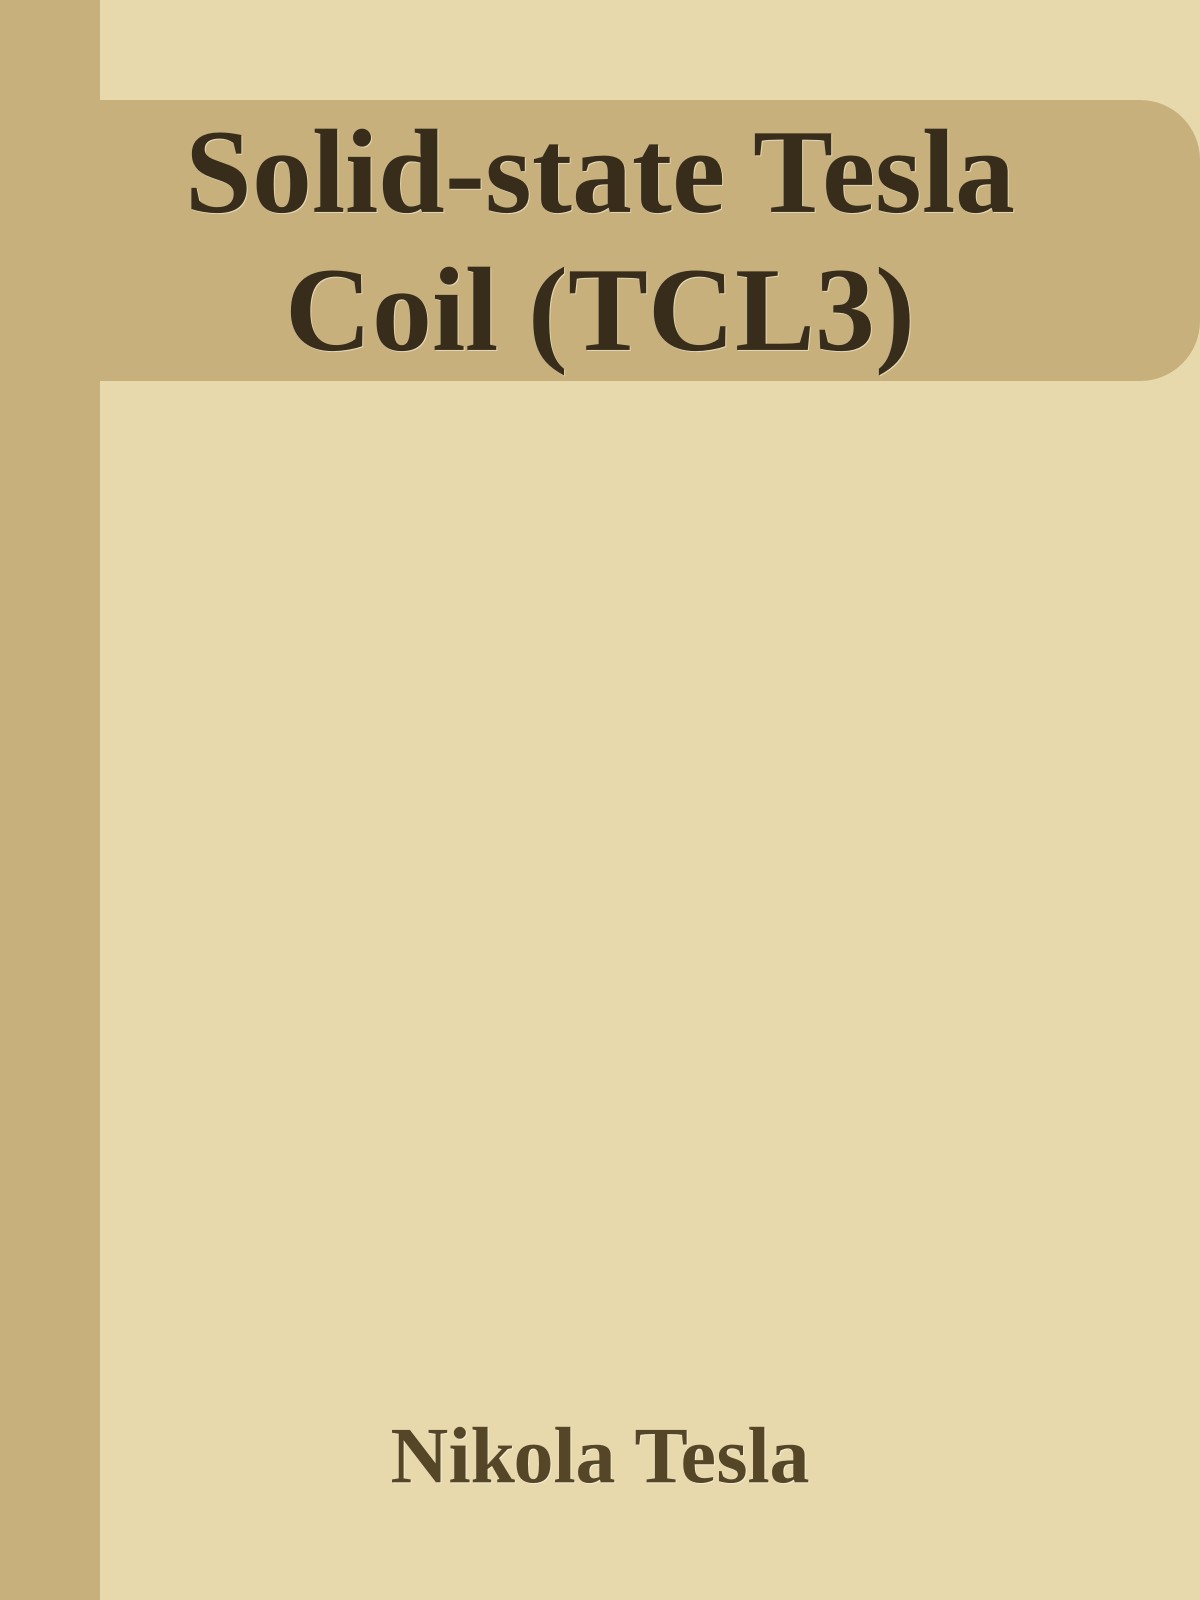 Solid-state Tesla Coil (TCL3)